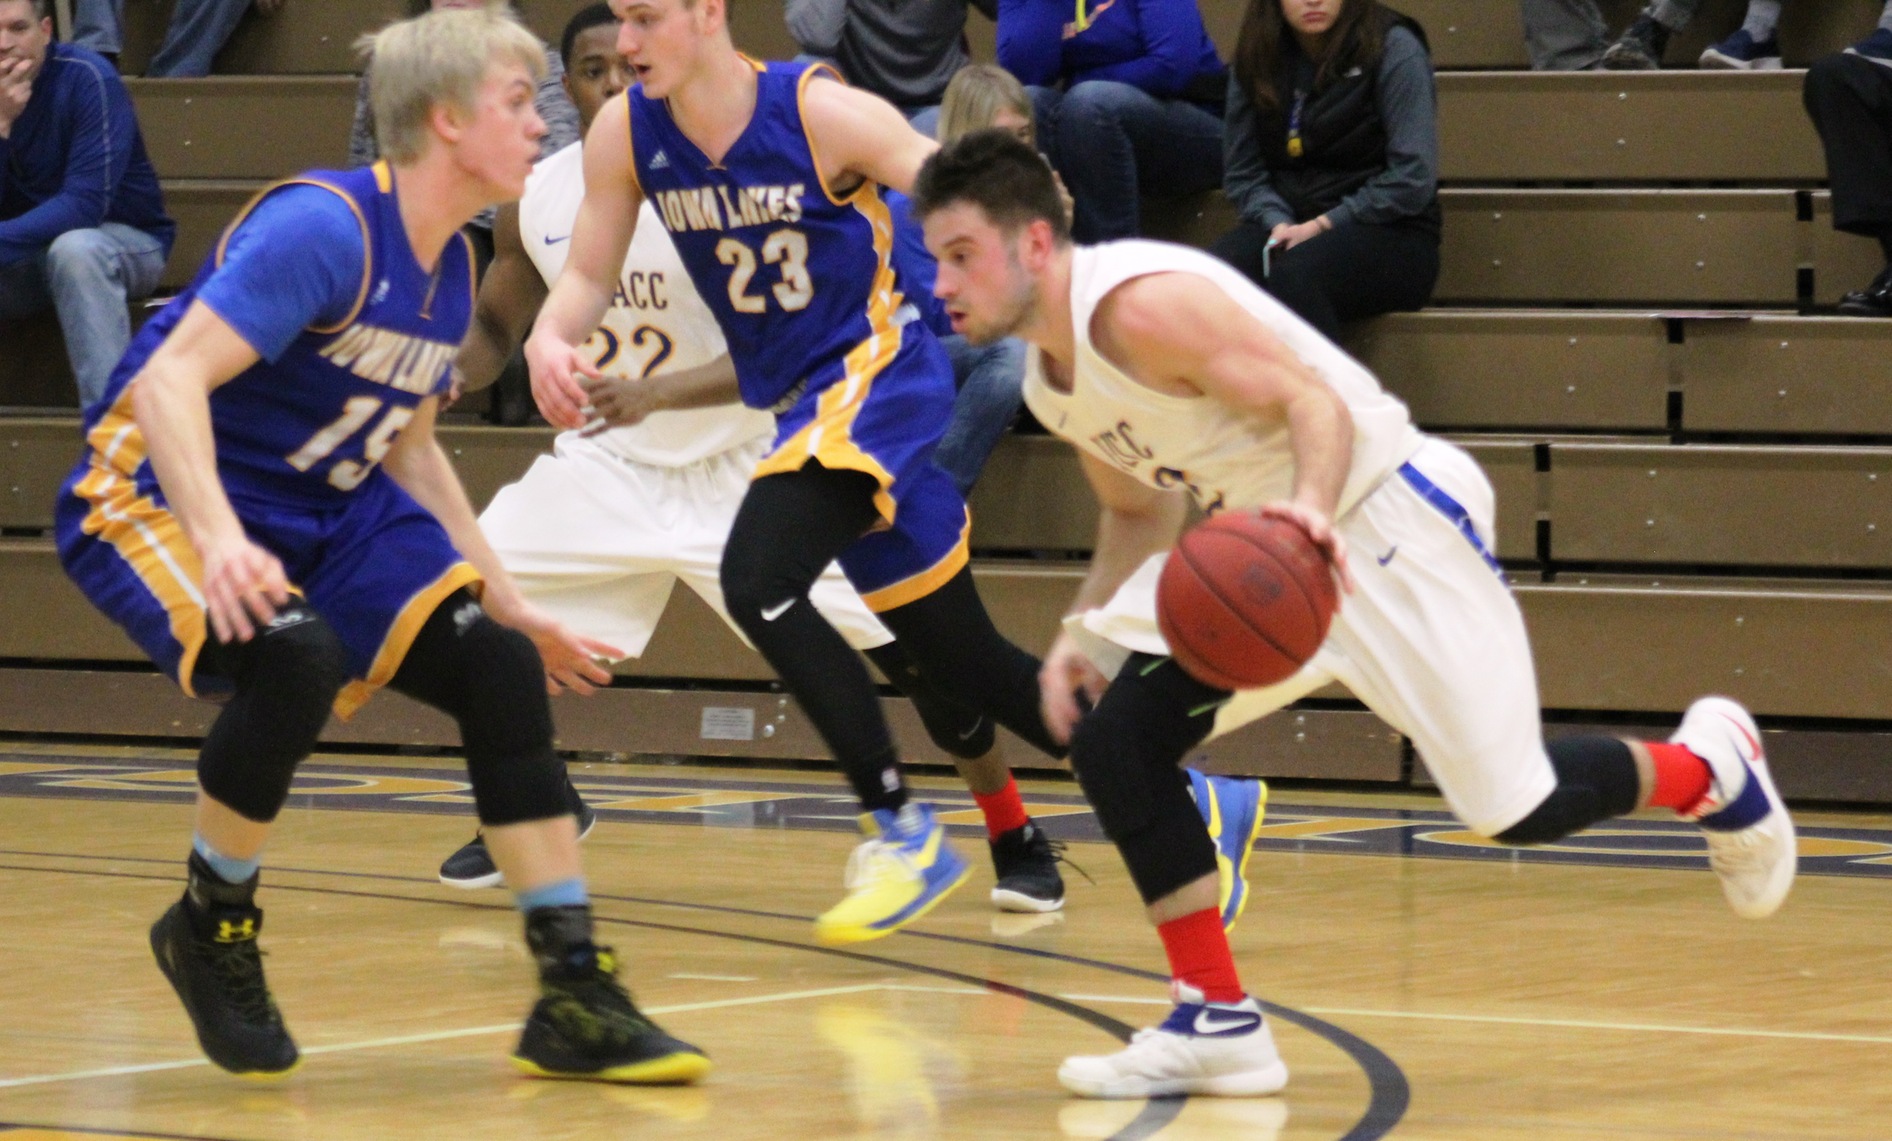 NIACC's Matt Baker drives to the basket during Wednesday's ICCAC contest against Iowa Lakes.